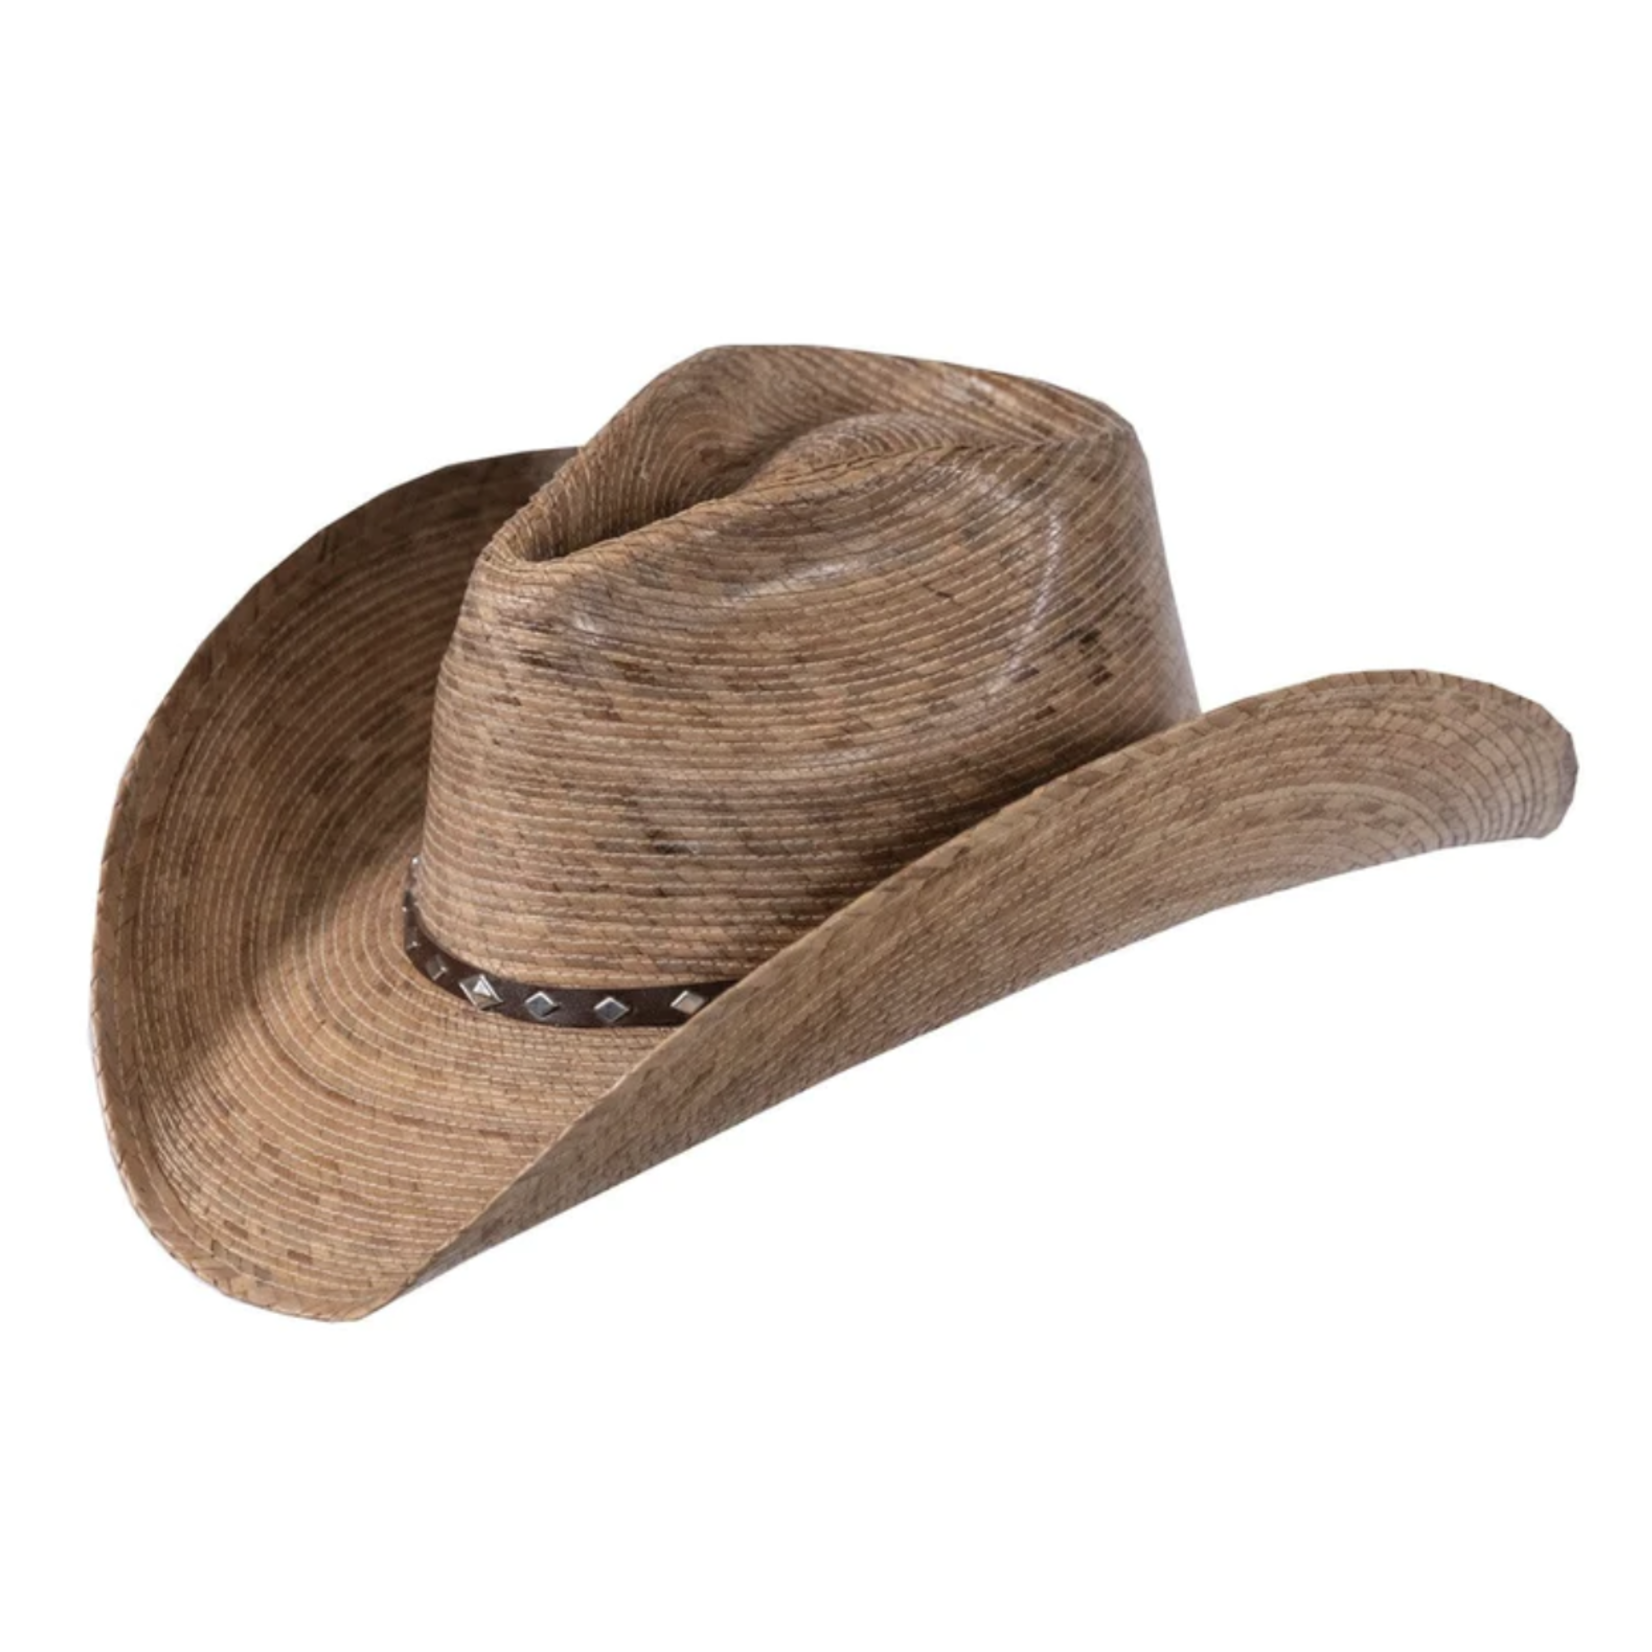 Outback Trading Company Carlsbad Straw Hat